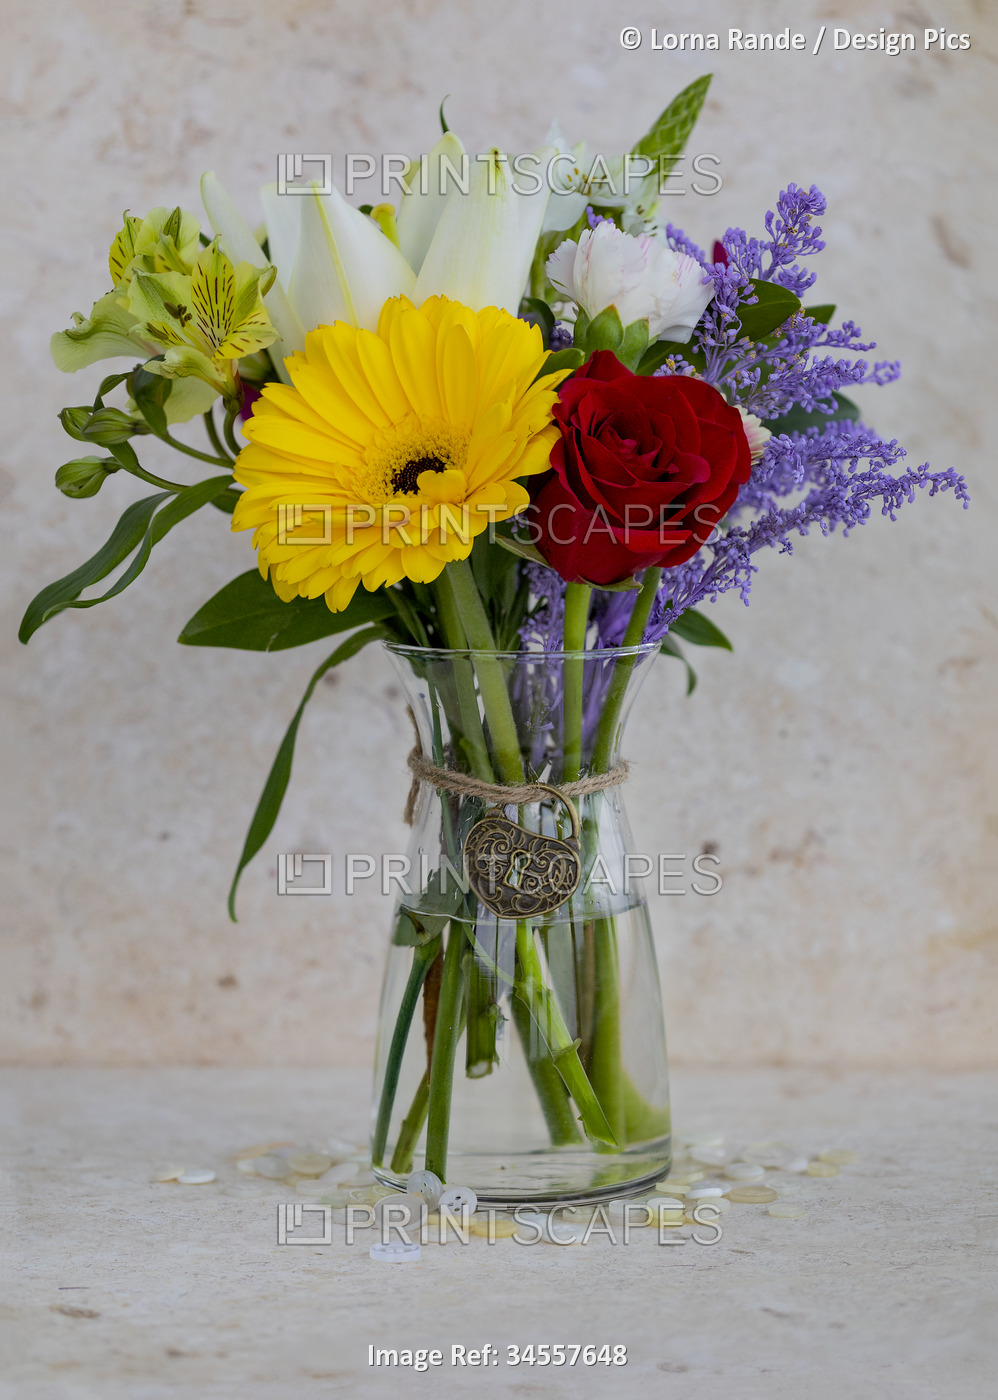 Small, colorful bouquet in a glass vase with a heart-shaped, decorative charm ...